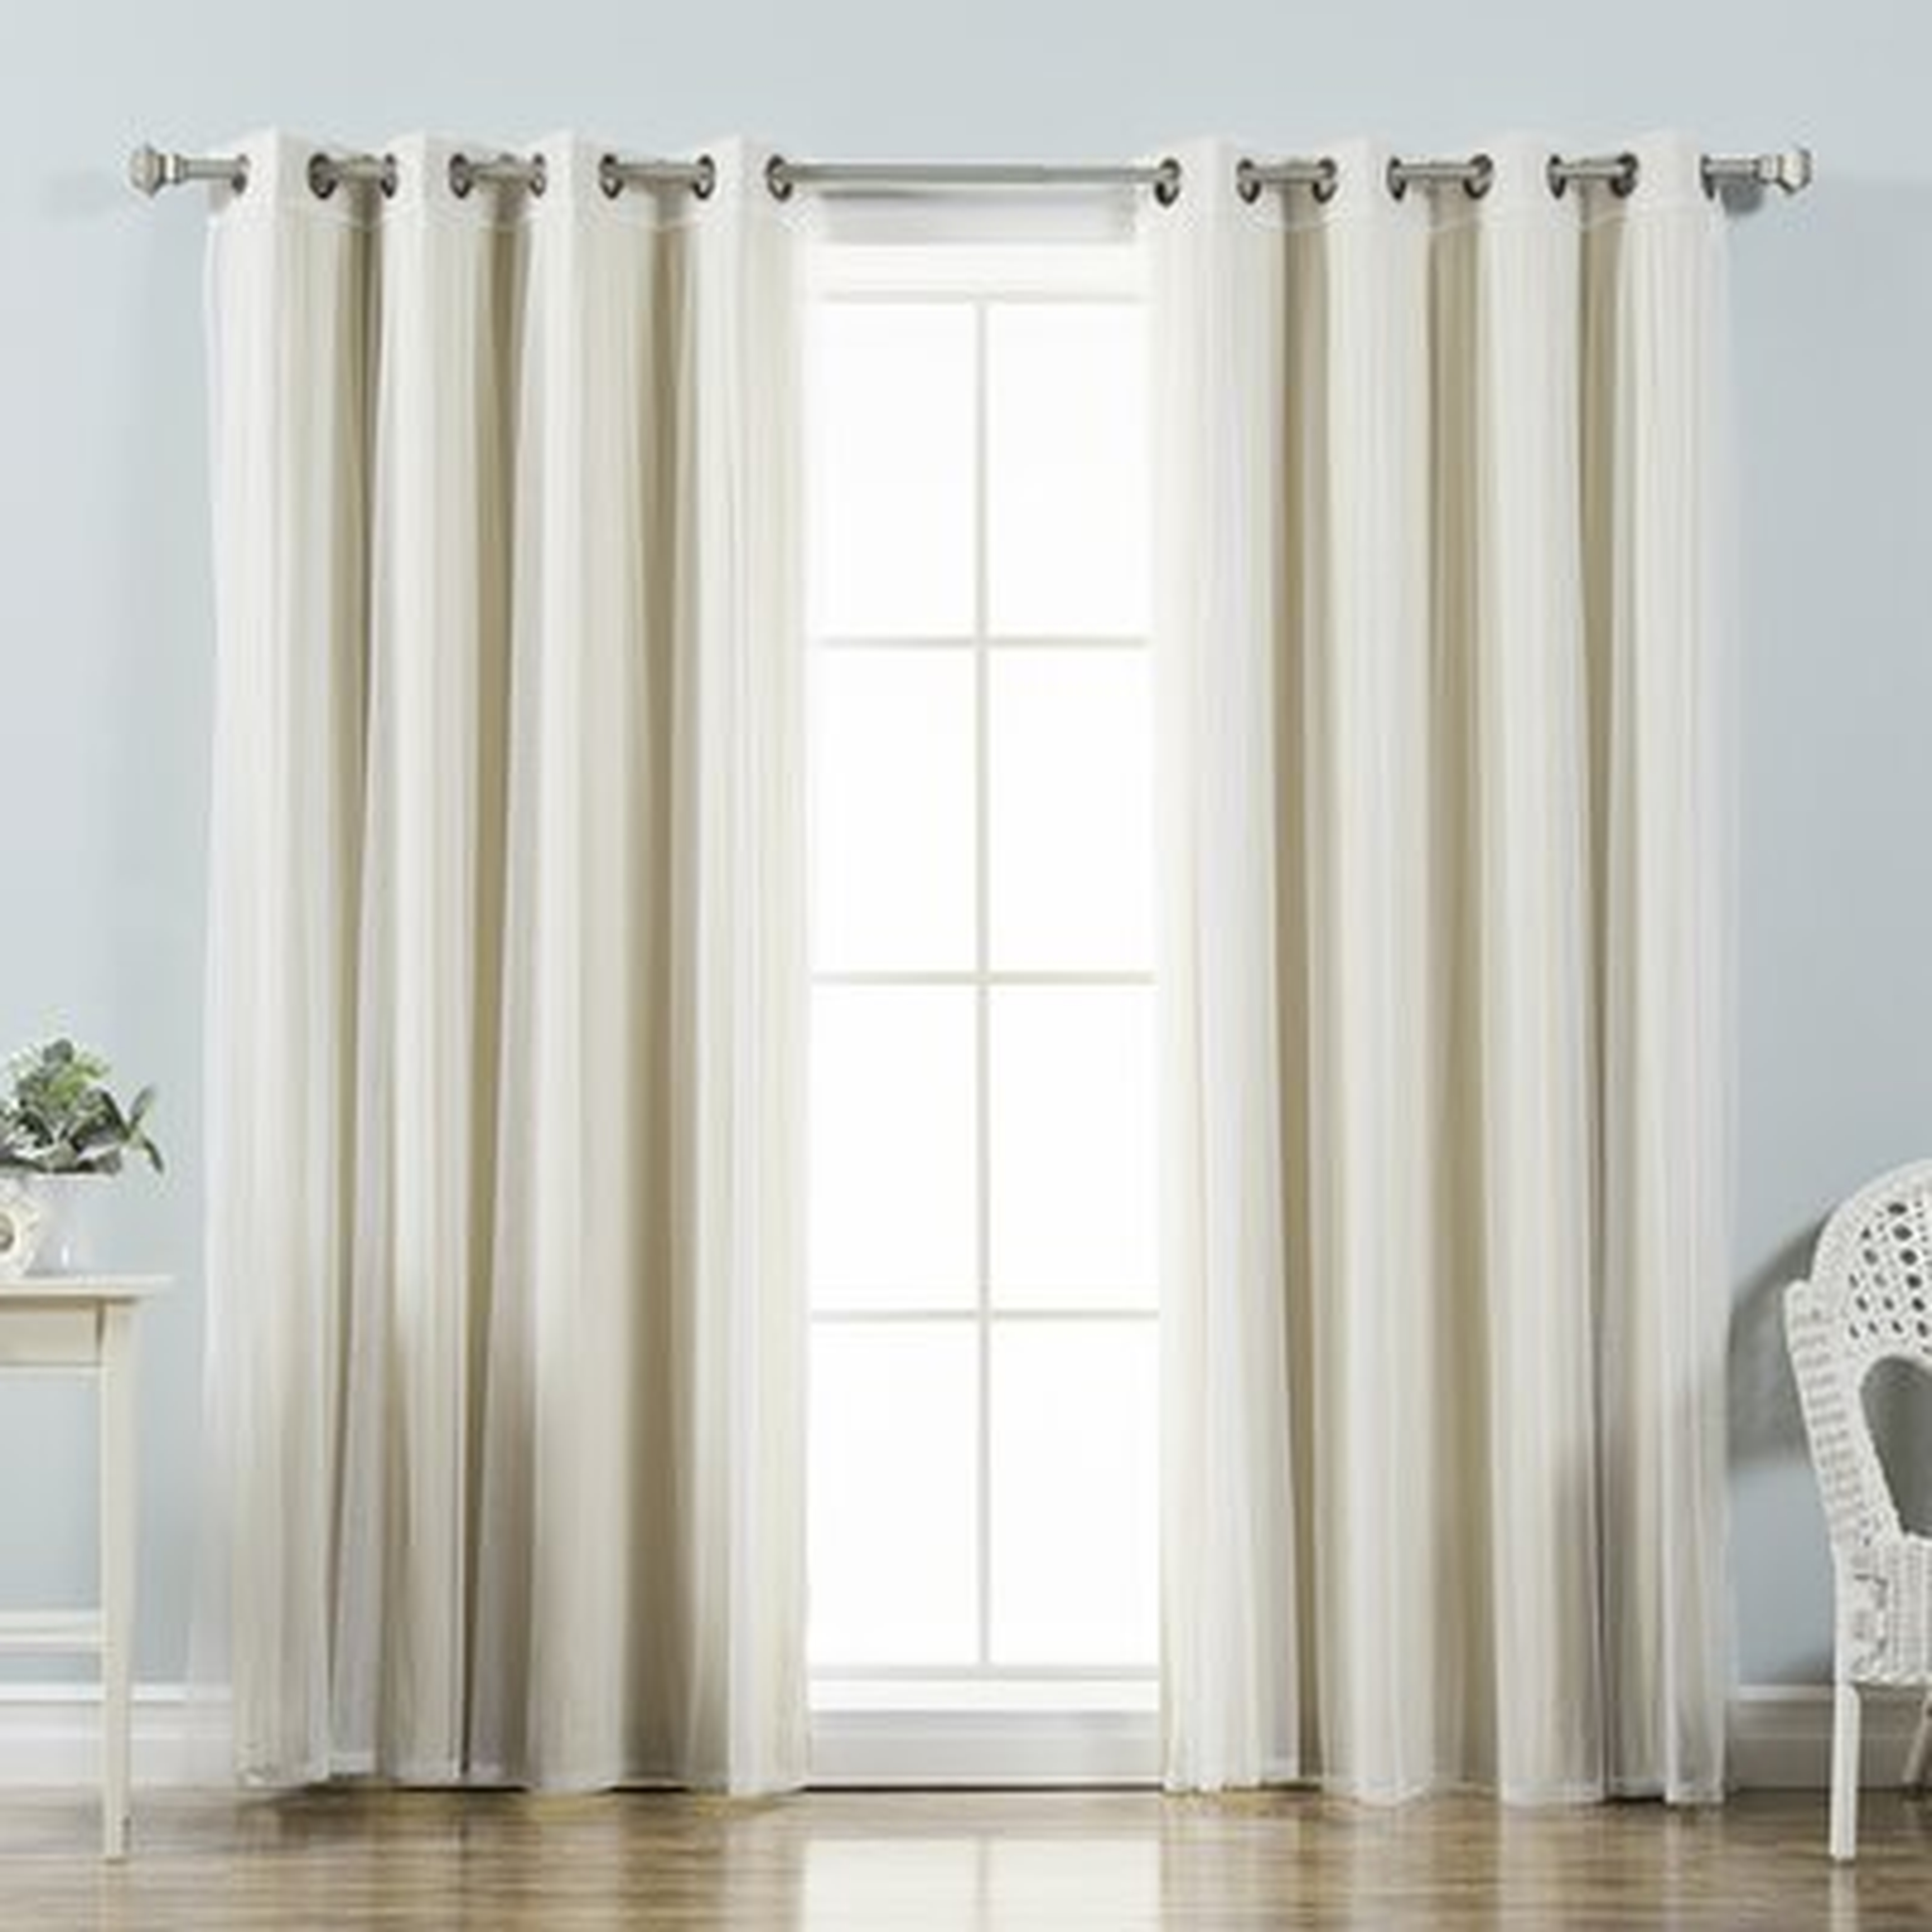 Feaster Solid Blackout Thermal Grommet Curtain Panels - Birch Lane